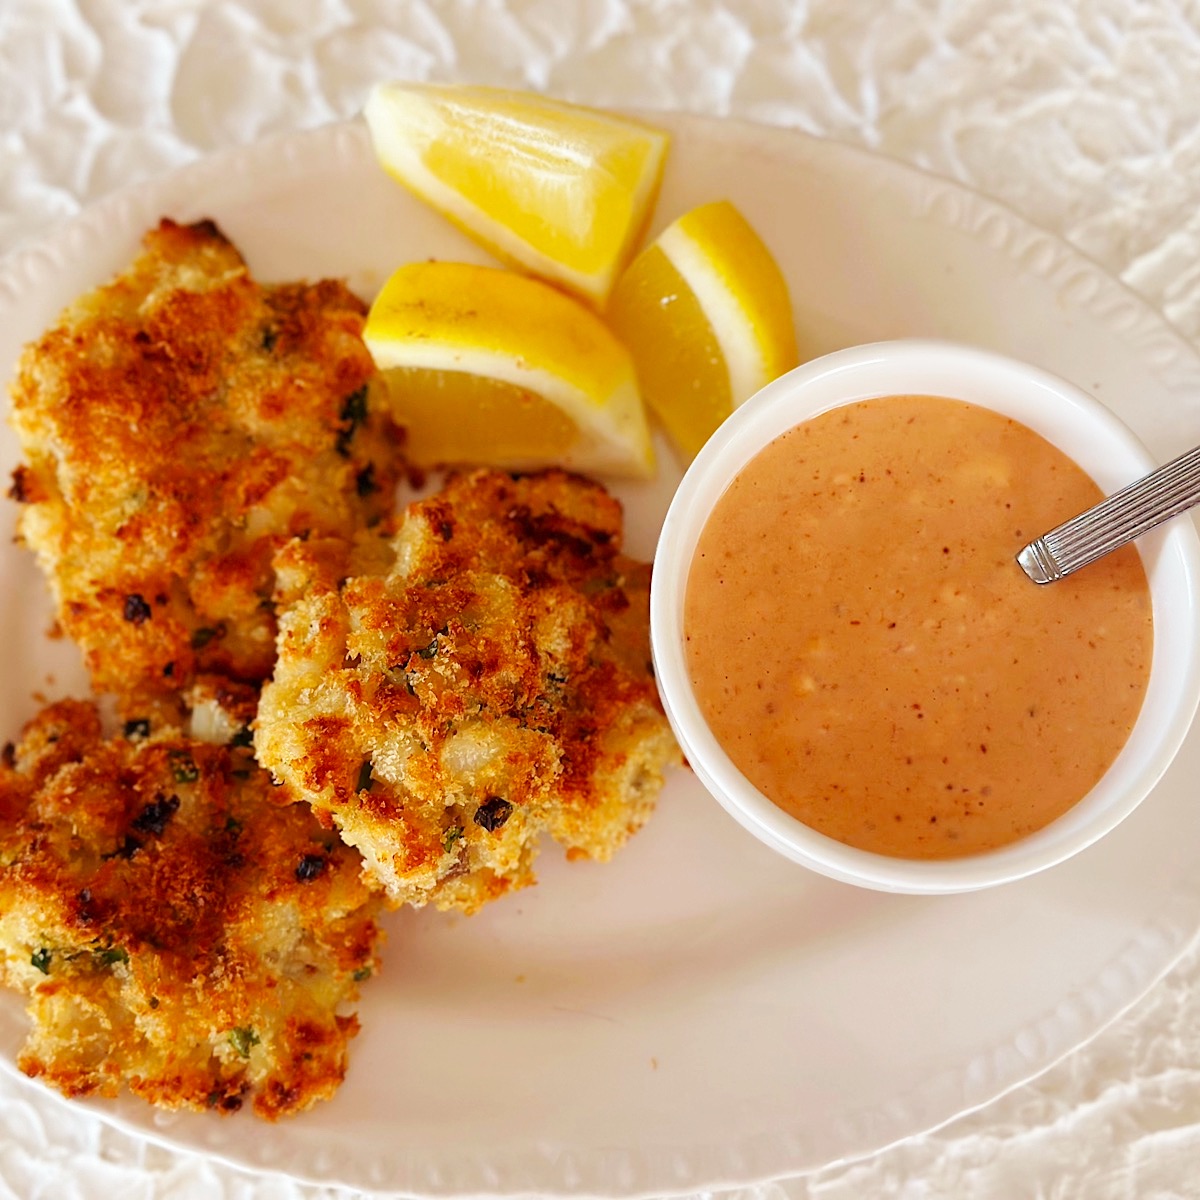 3 fish cakes with lemon garnish and a Southern comeback dipping sauce.